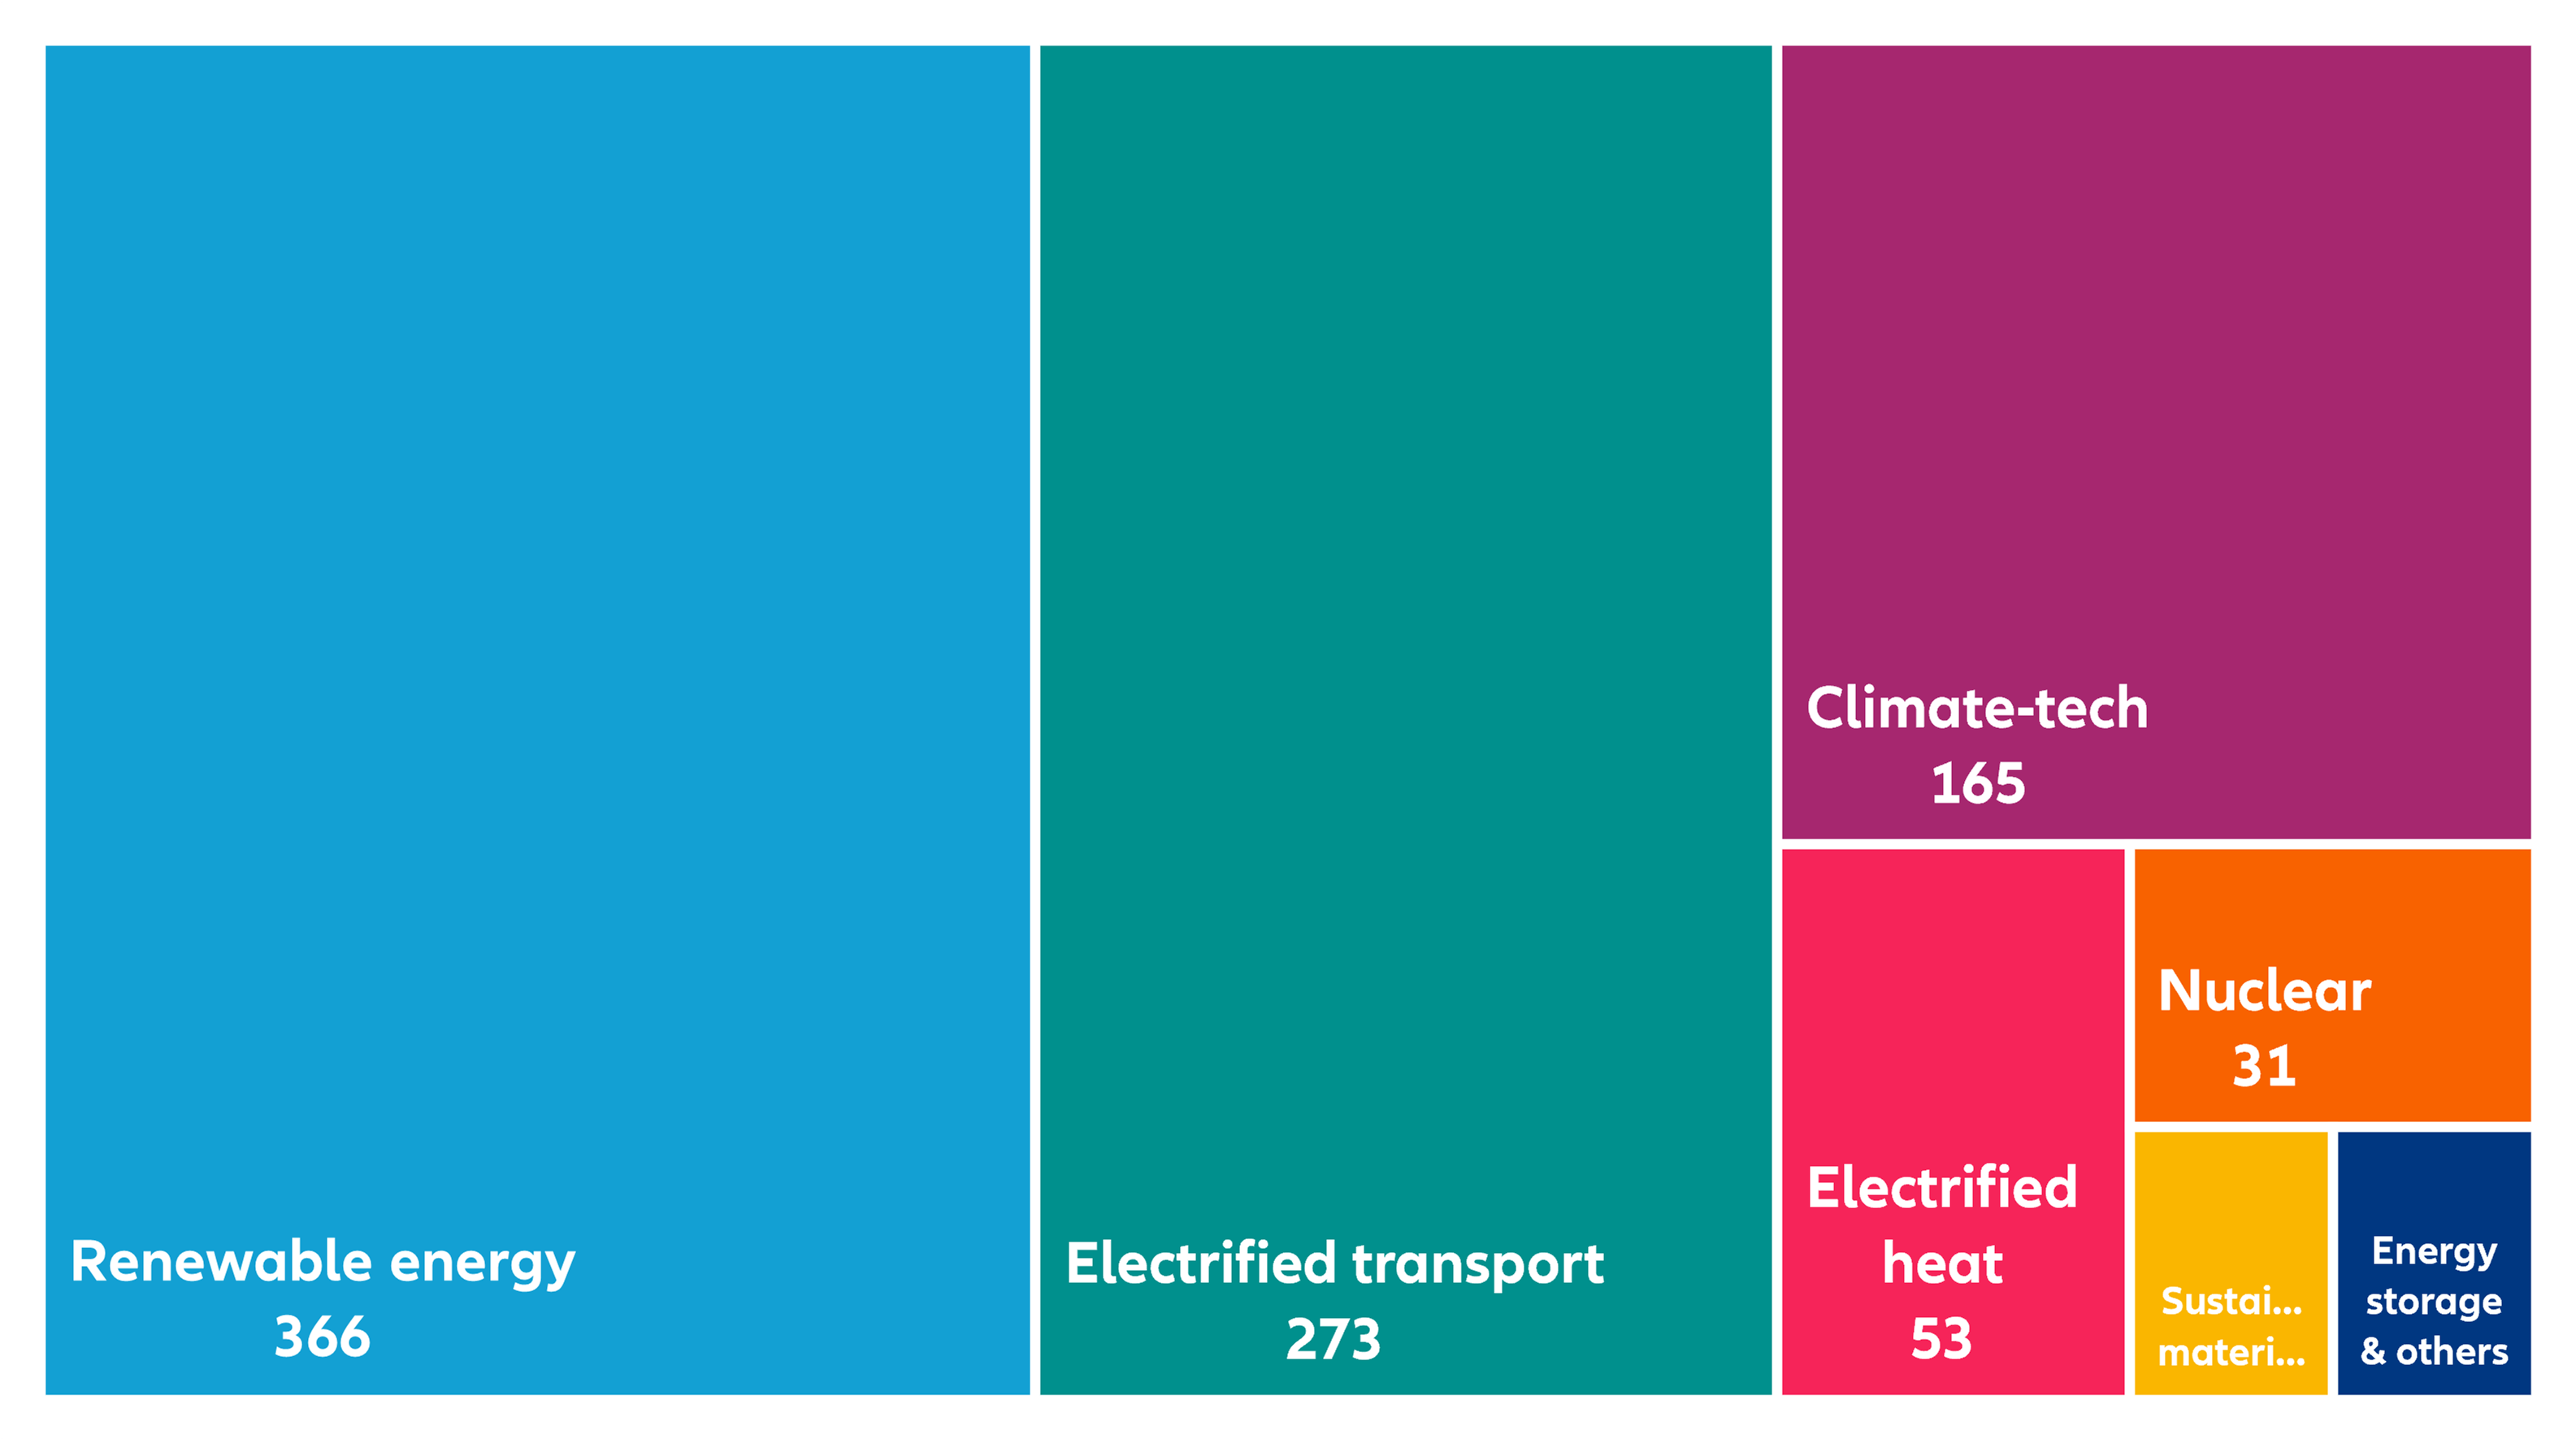 Figure 3 – 2021 energy transition investment breakdown by category (USD bn)